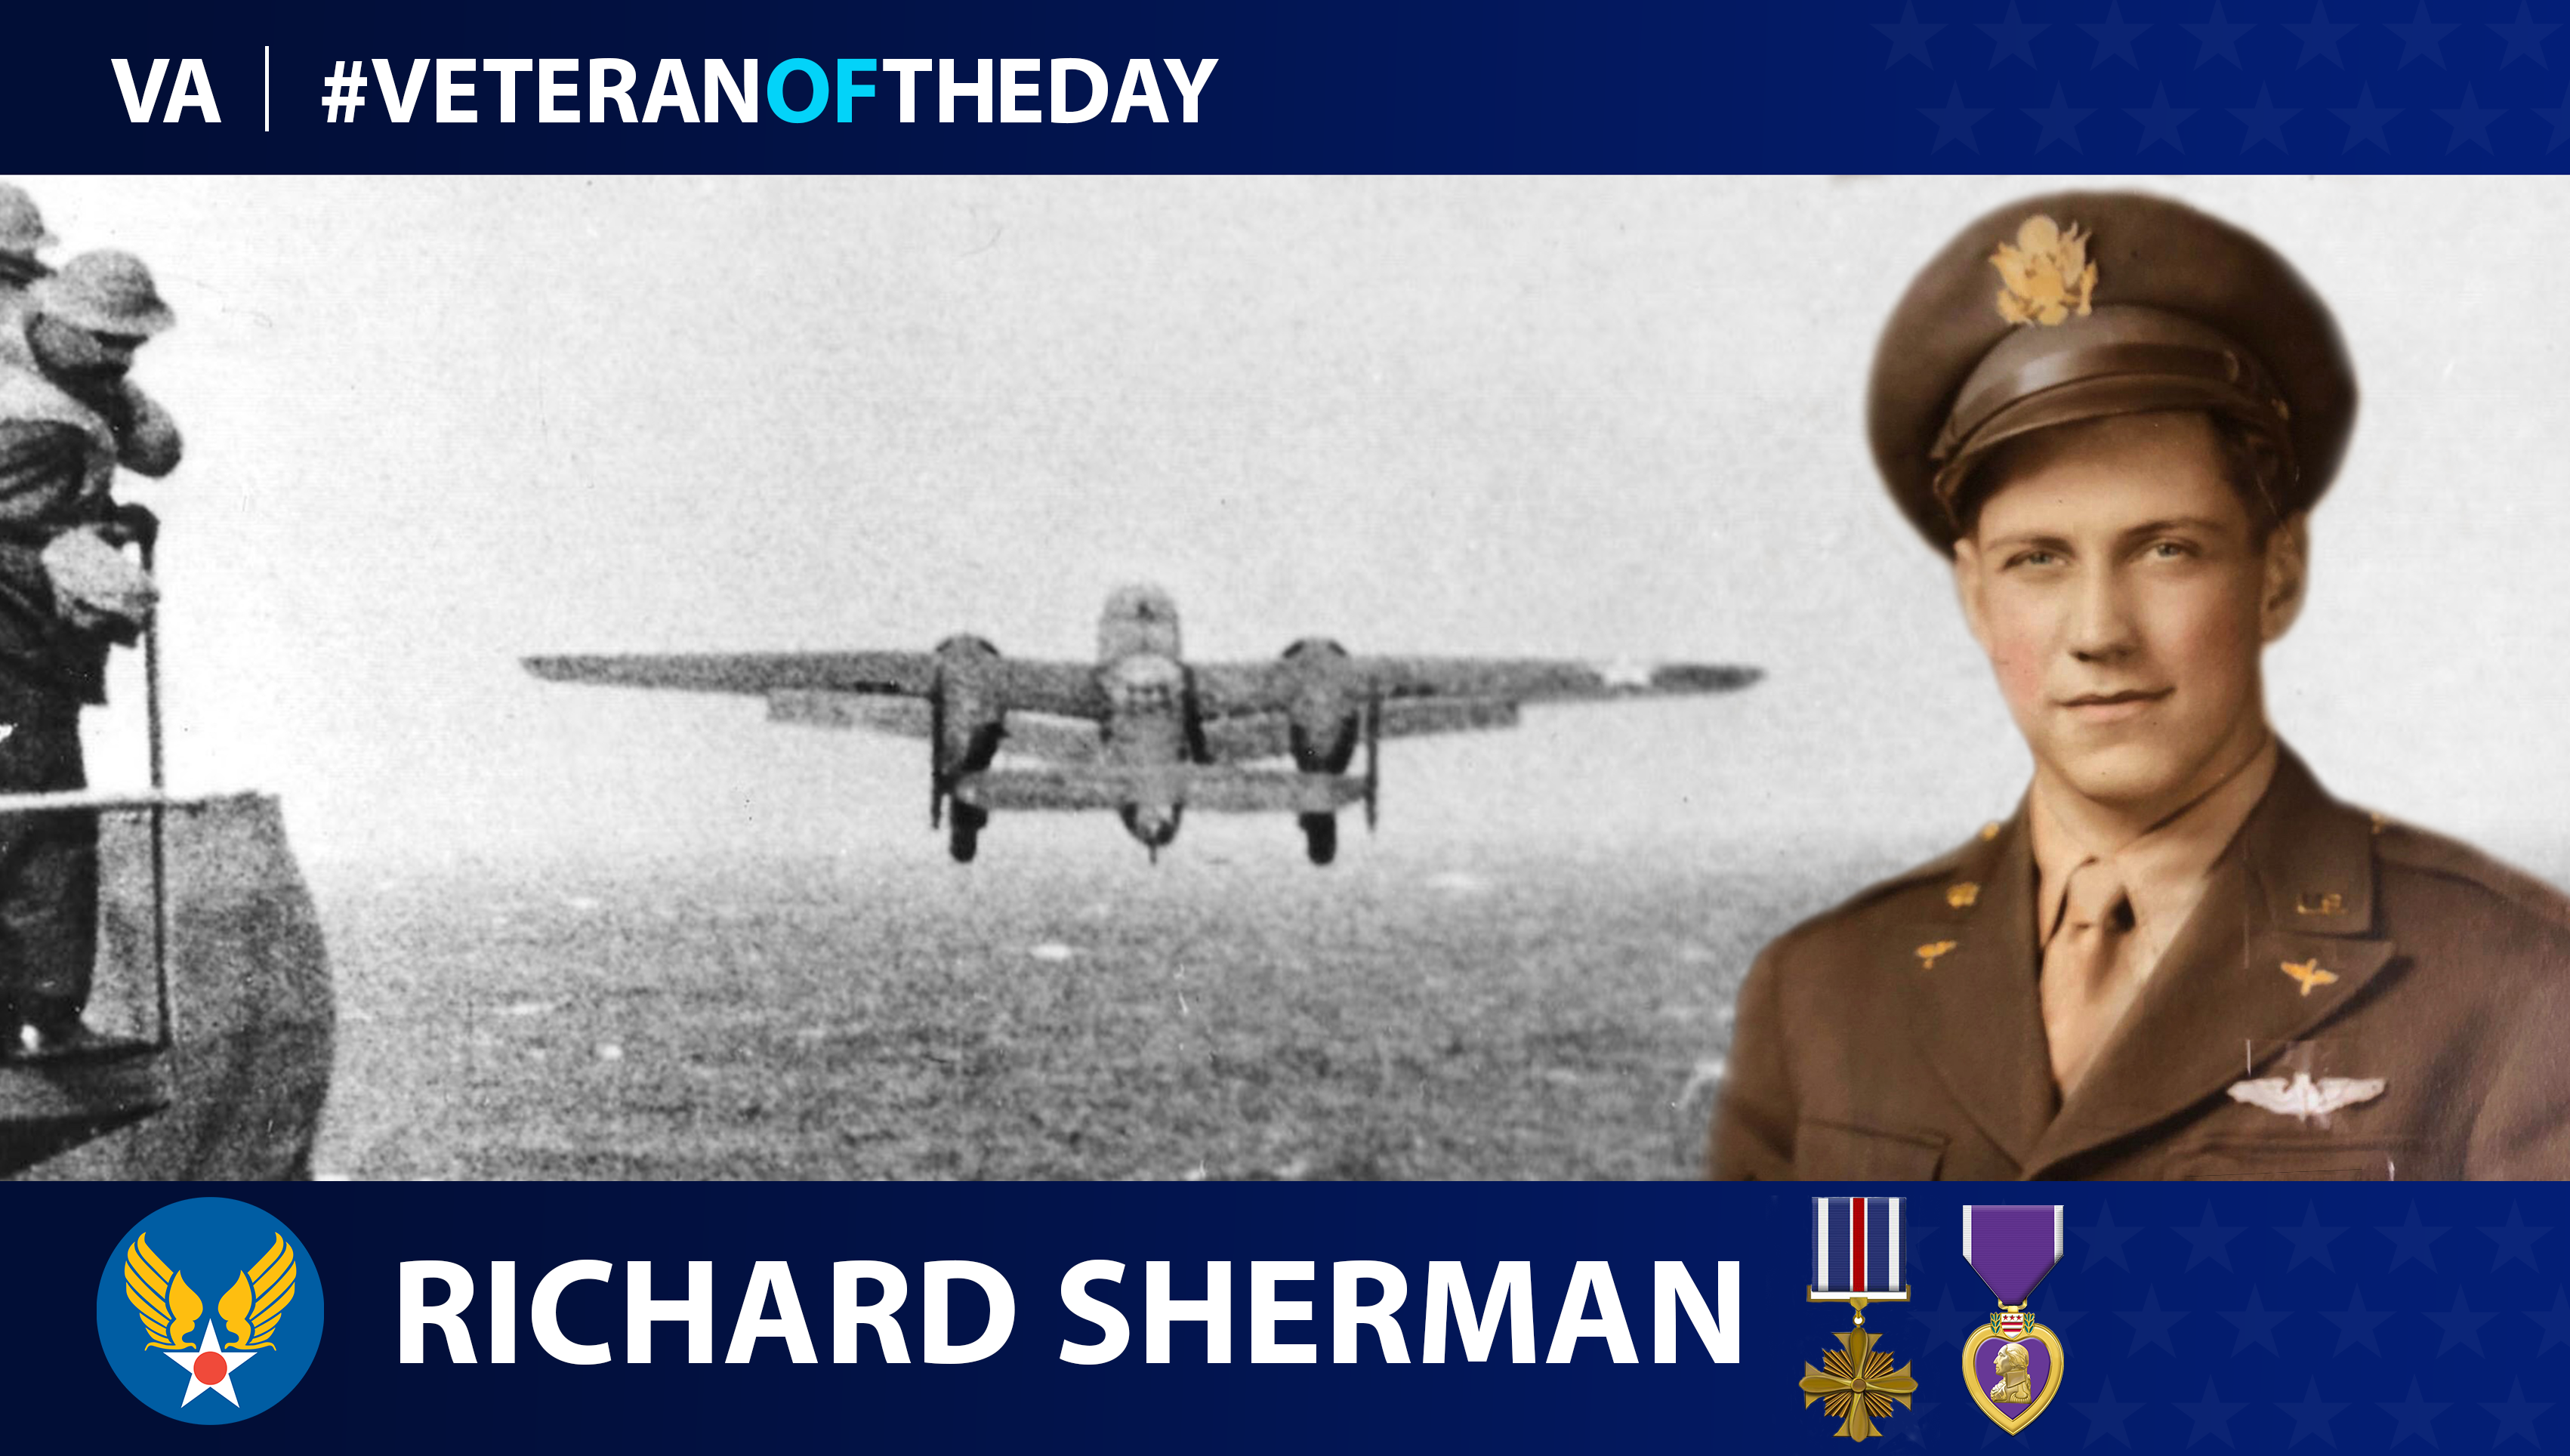 Army Air Forces Veteran Richard Sherman is today's Veteran of the Day.